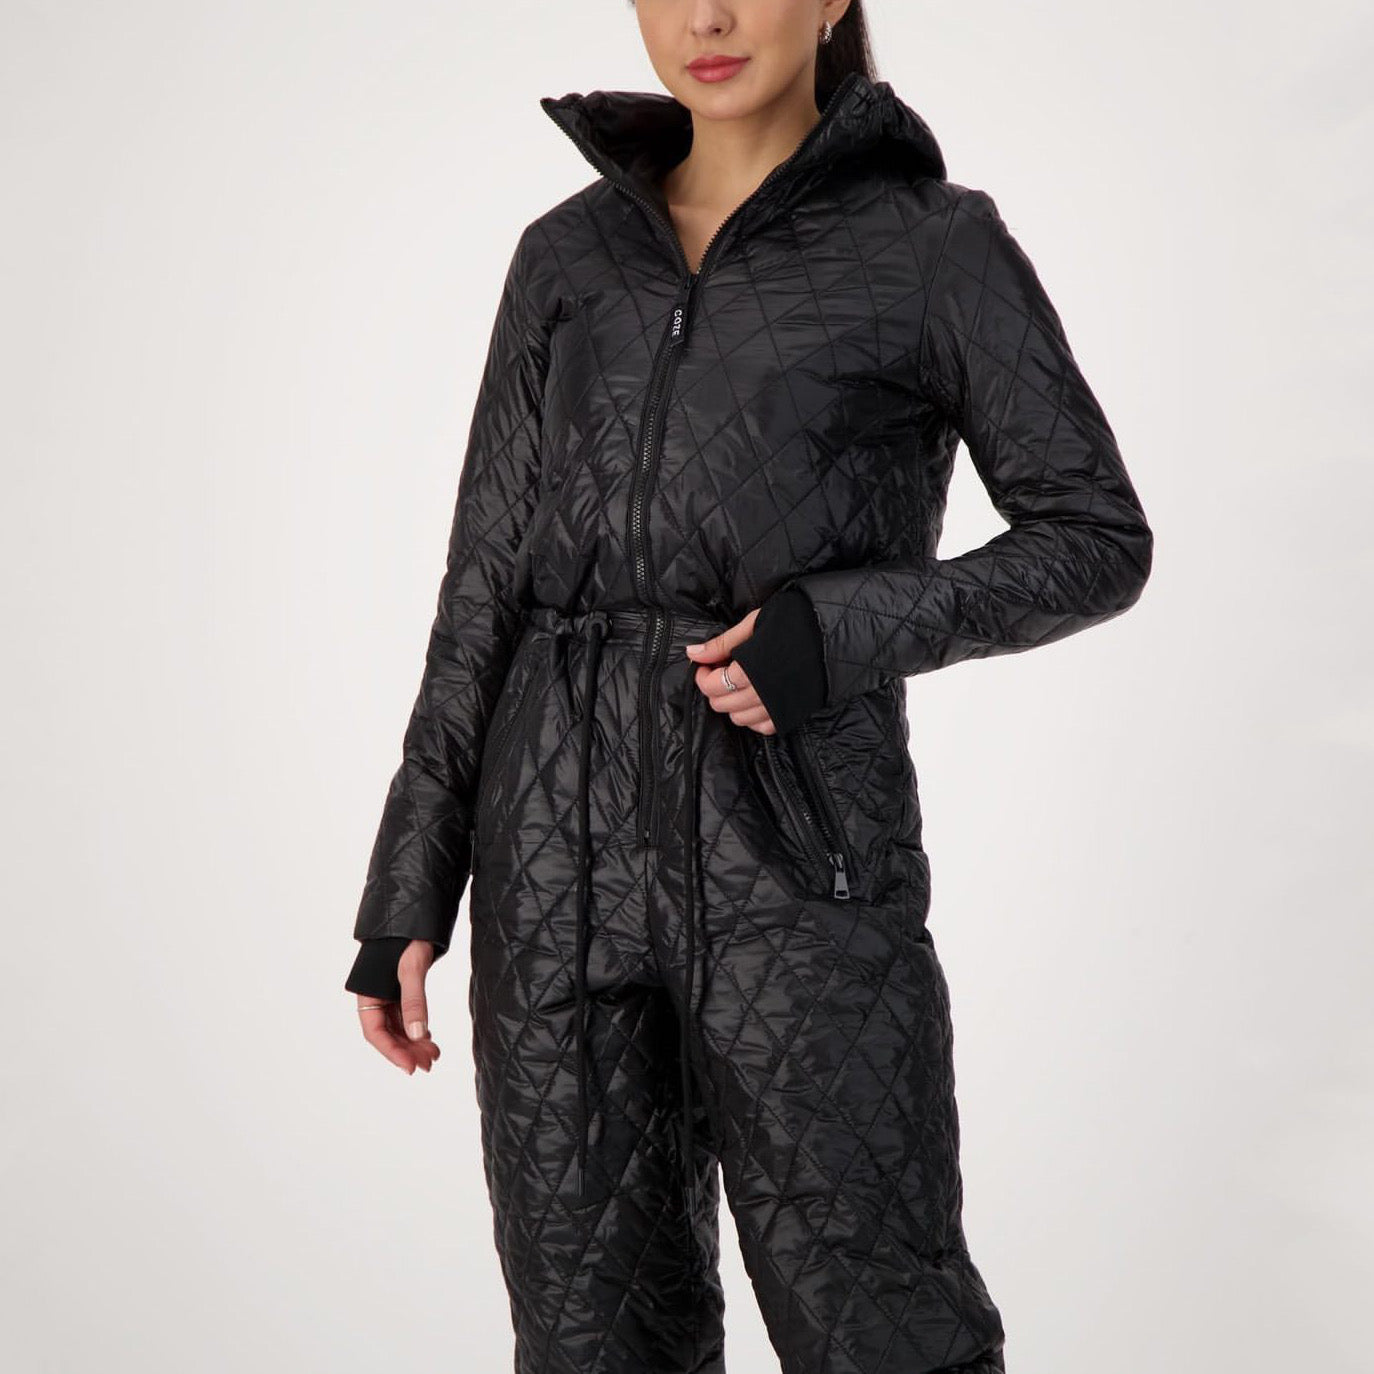 Gotstyle Fashion - COZE Jumpsuits Insulated Jumpsuit with Hood - Black